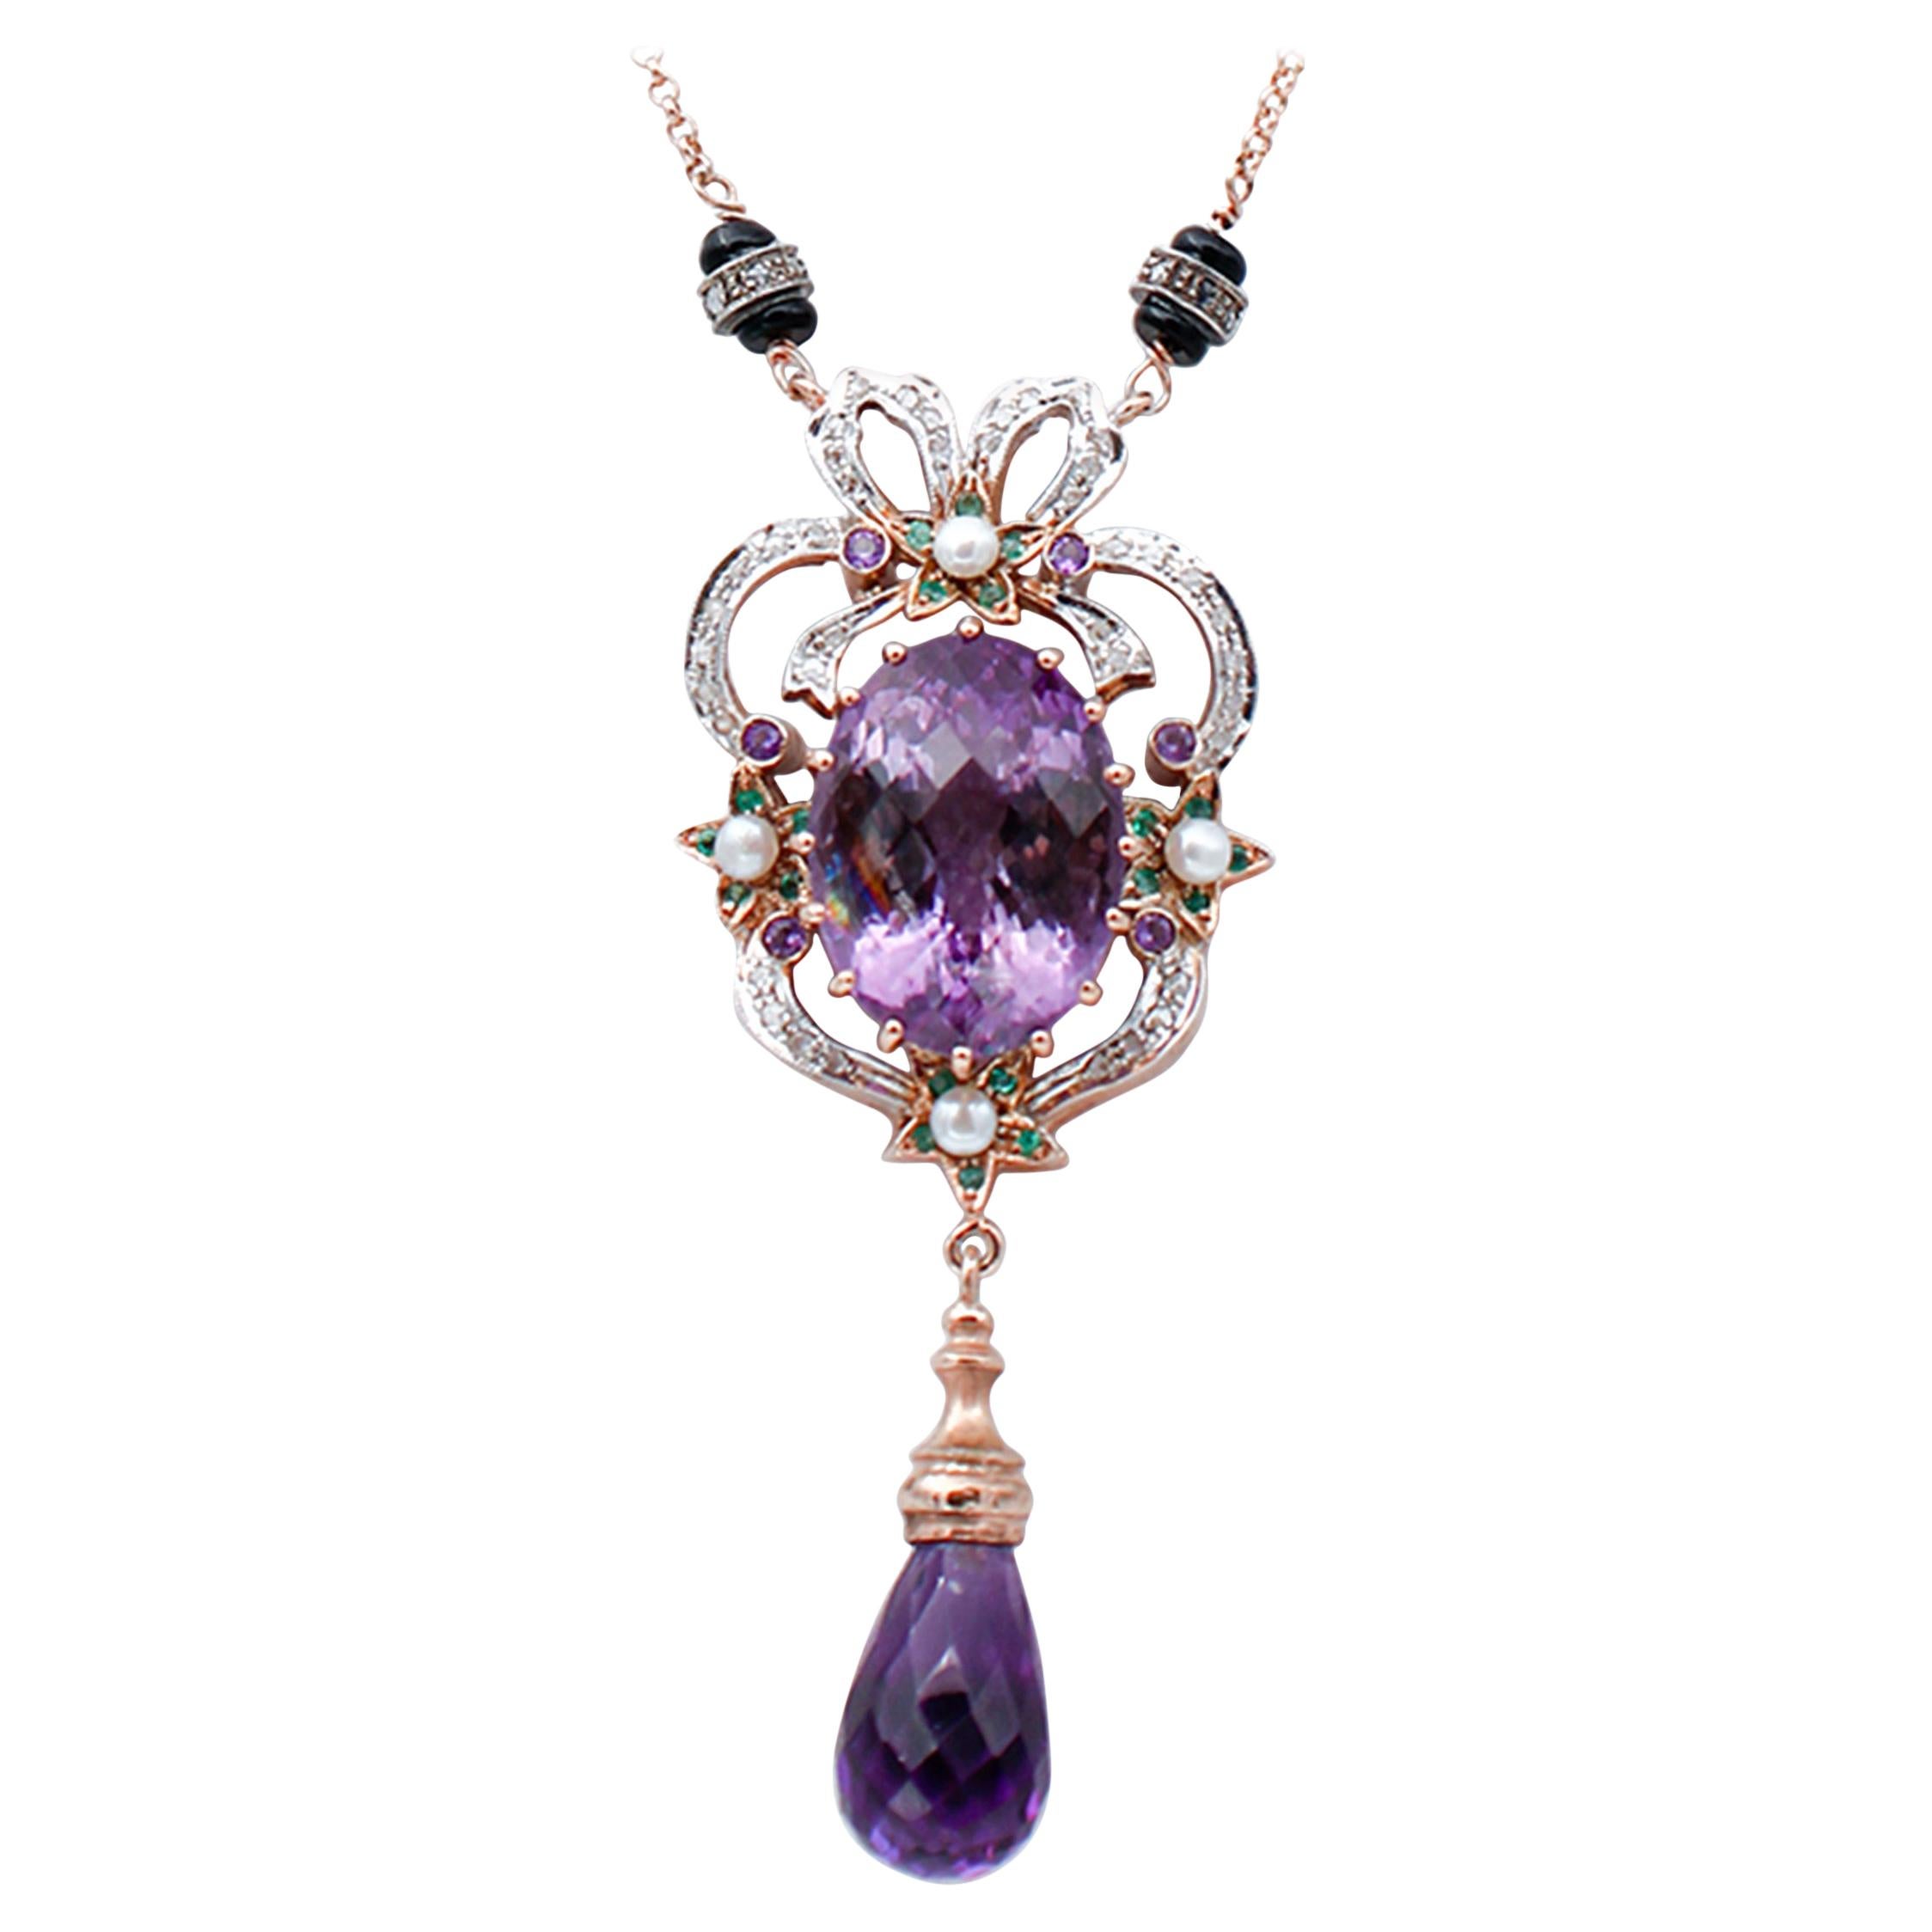 Diamonds, Emeralds, Amethysts, Onyx, Pearls, 9Karat Rose Gold and Silver Necklace